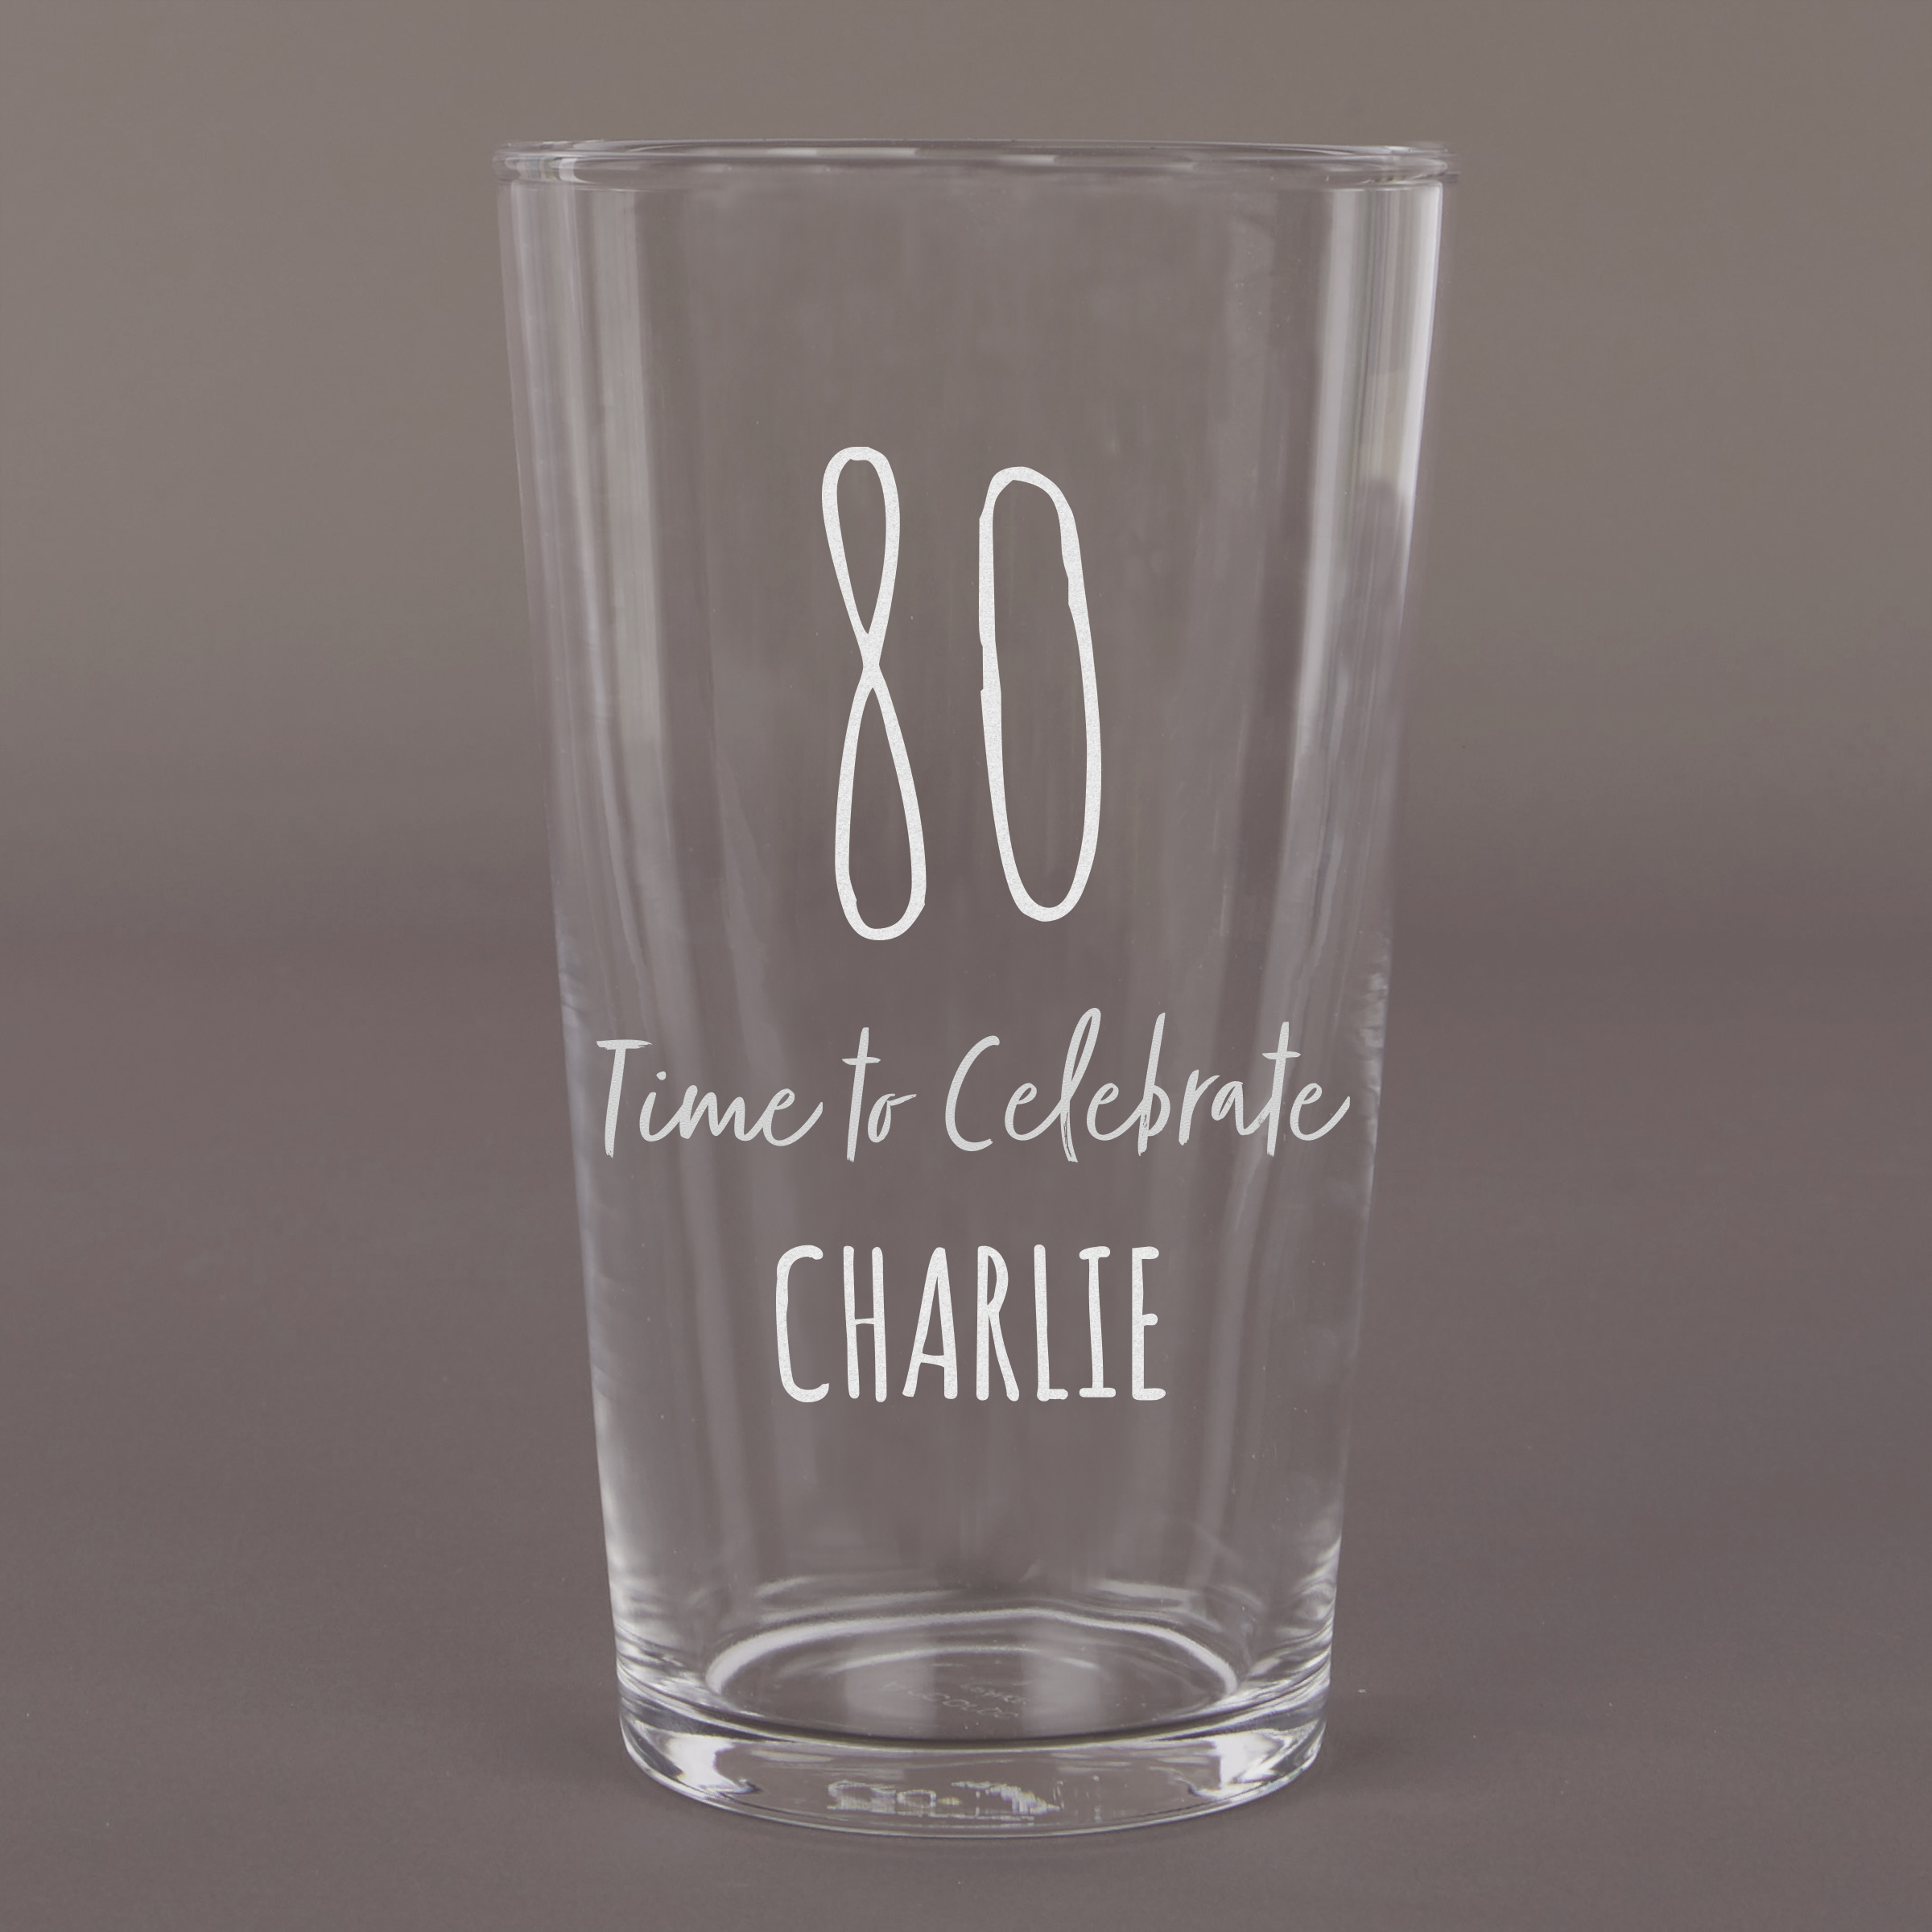 Personalised 80th Birthday Pint Glass - Time To Celebrate